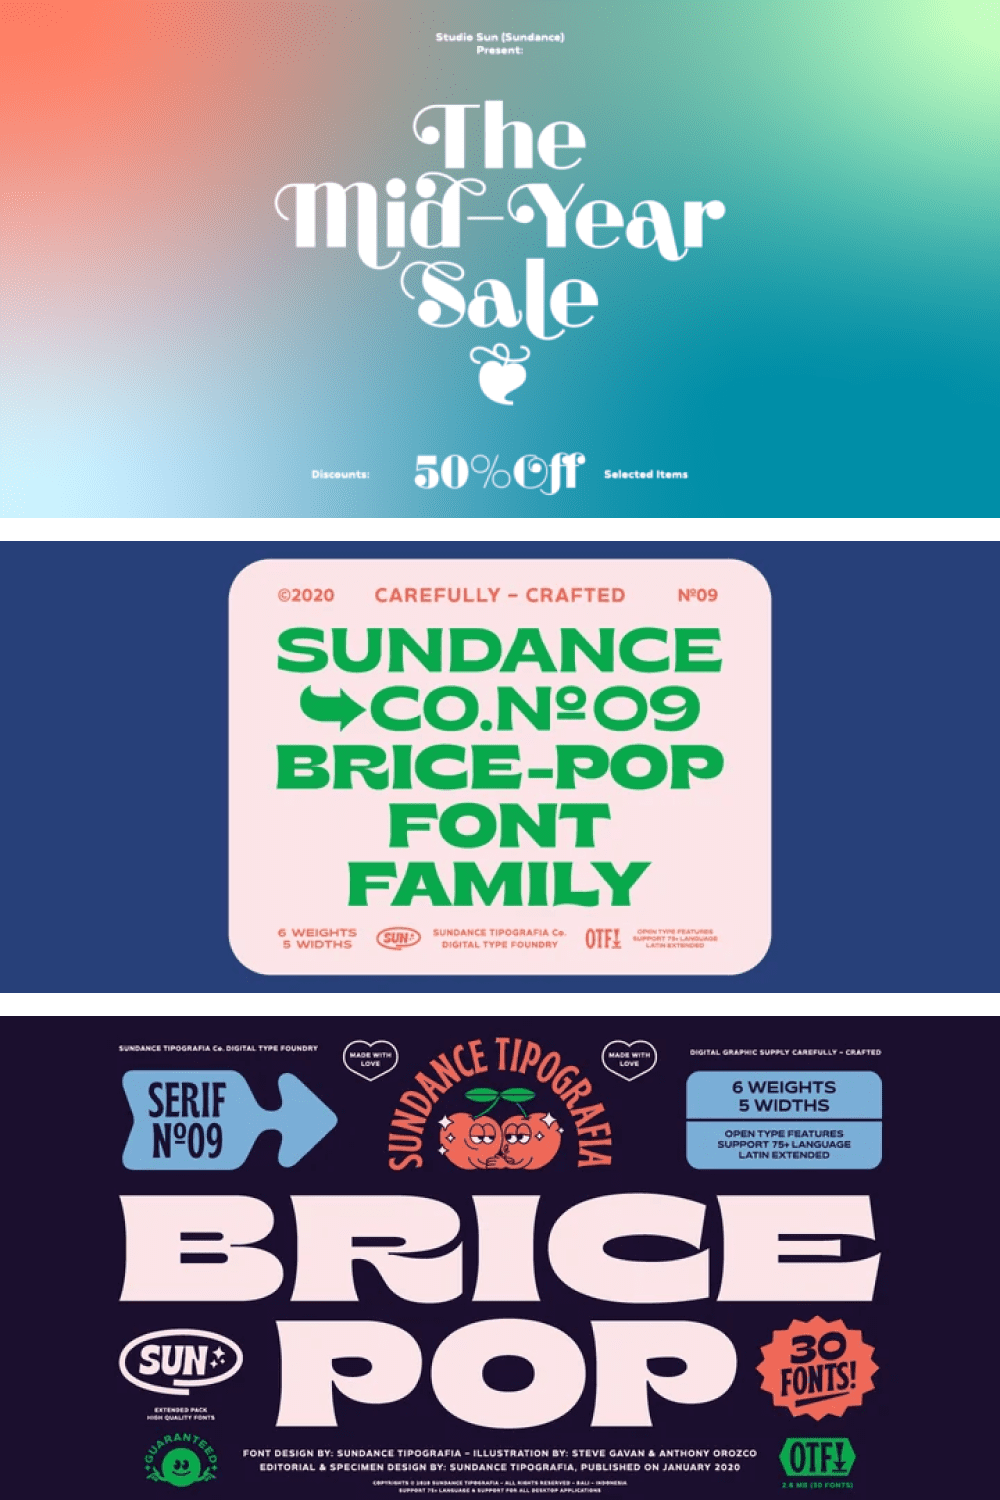 A sublime and dreamy font in a variety of vibrant colors.